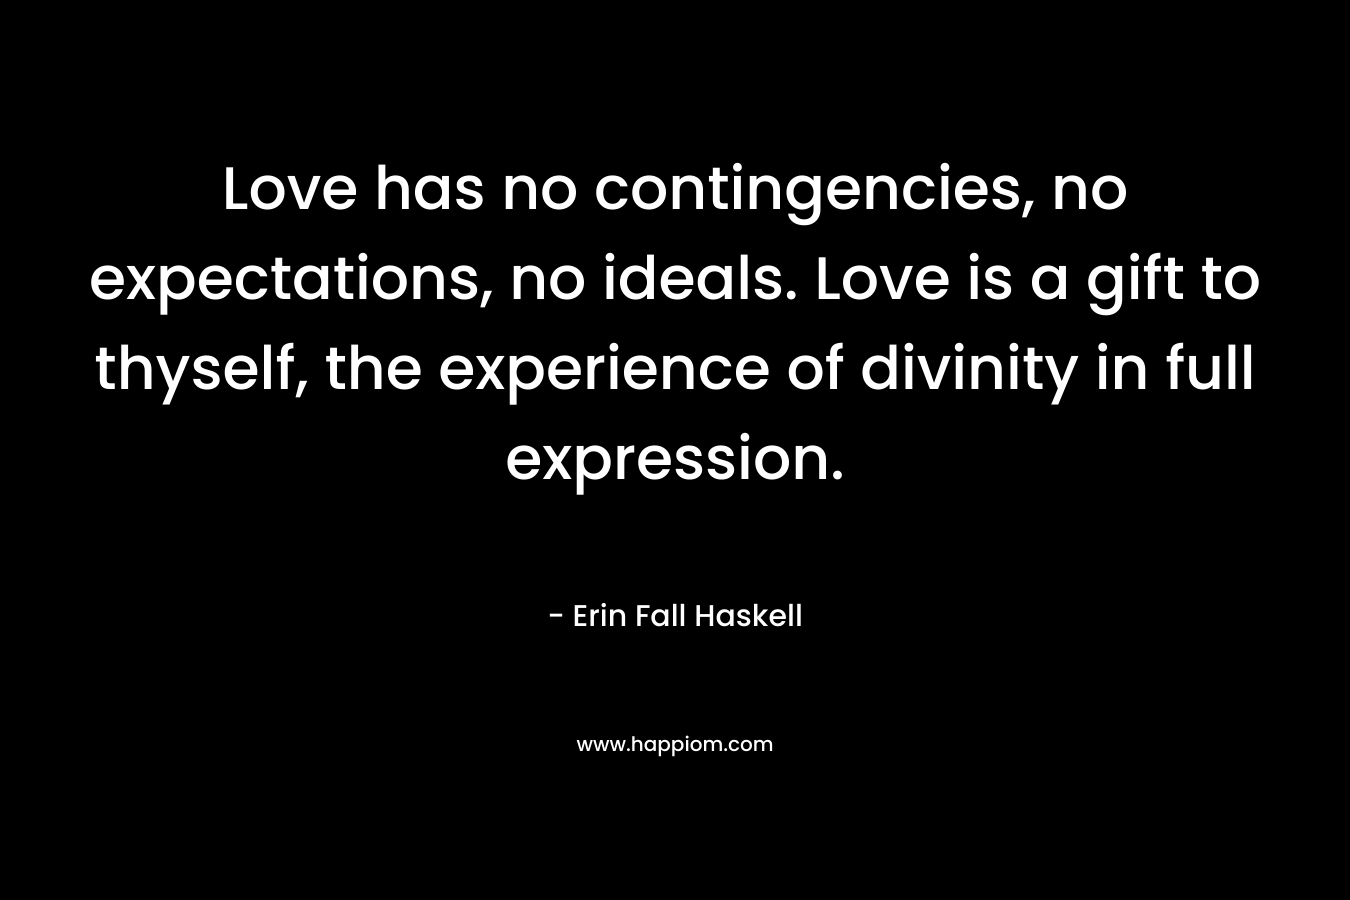 Love has no contingencies, no expectations, no ideals. Love is a gift to thyself, the experience of divinity in full expression. – Erin Fall Haskell